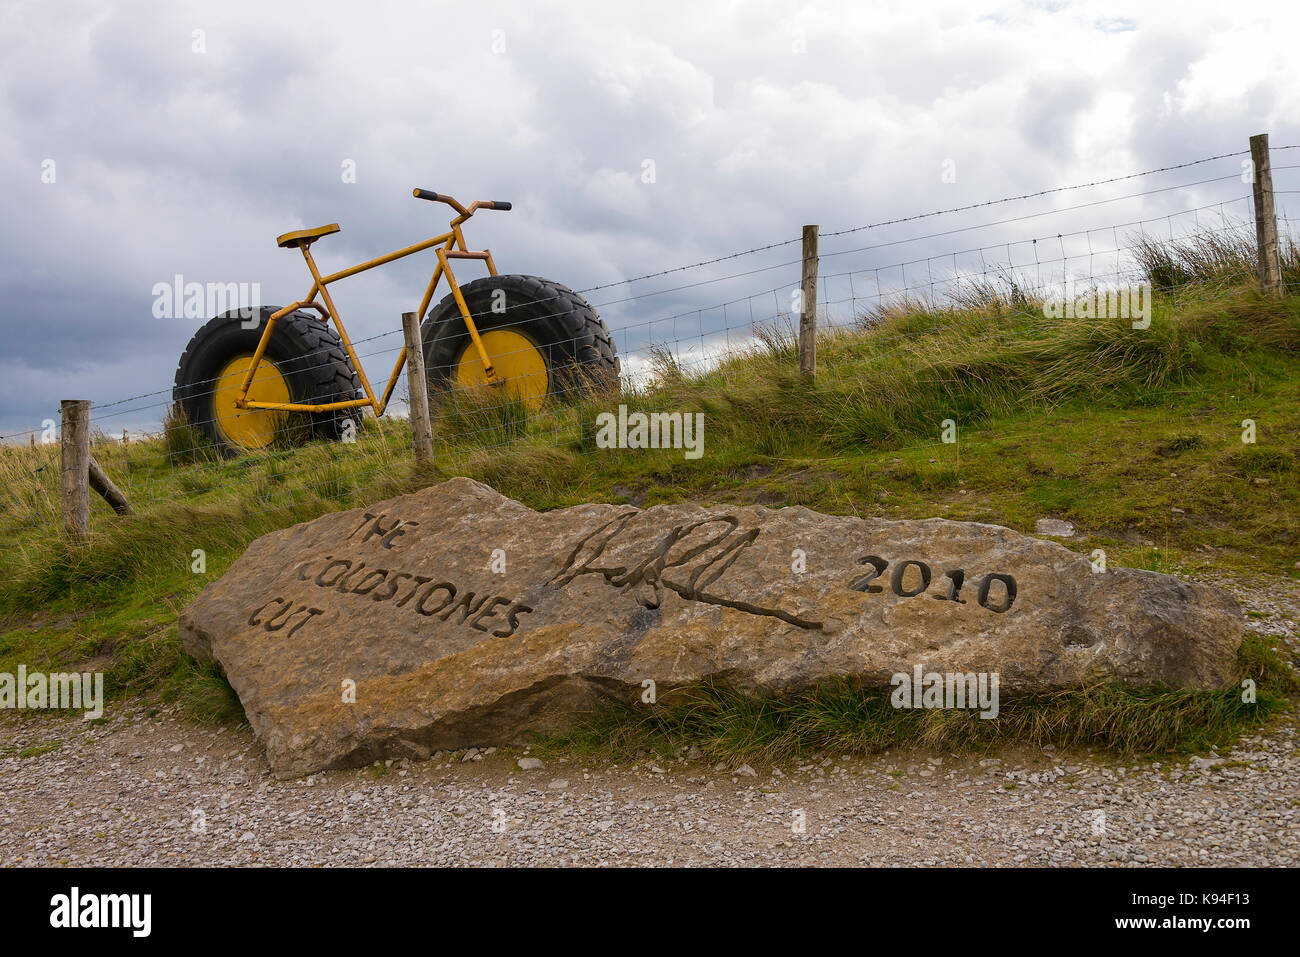 A Large Model Bicycle on a Hilltop by Coldstones Cut near Pateley Bridge North Yorkshire England United Kingdom UK Stock Photo